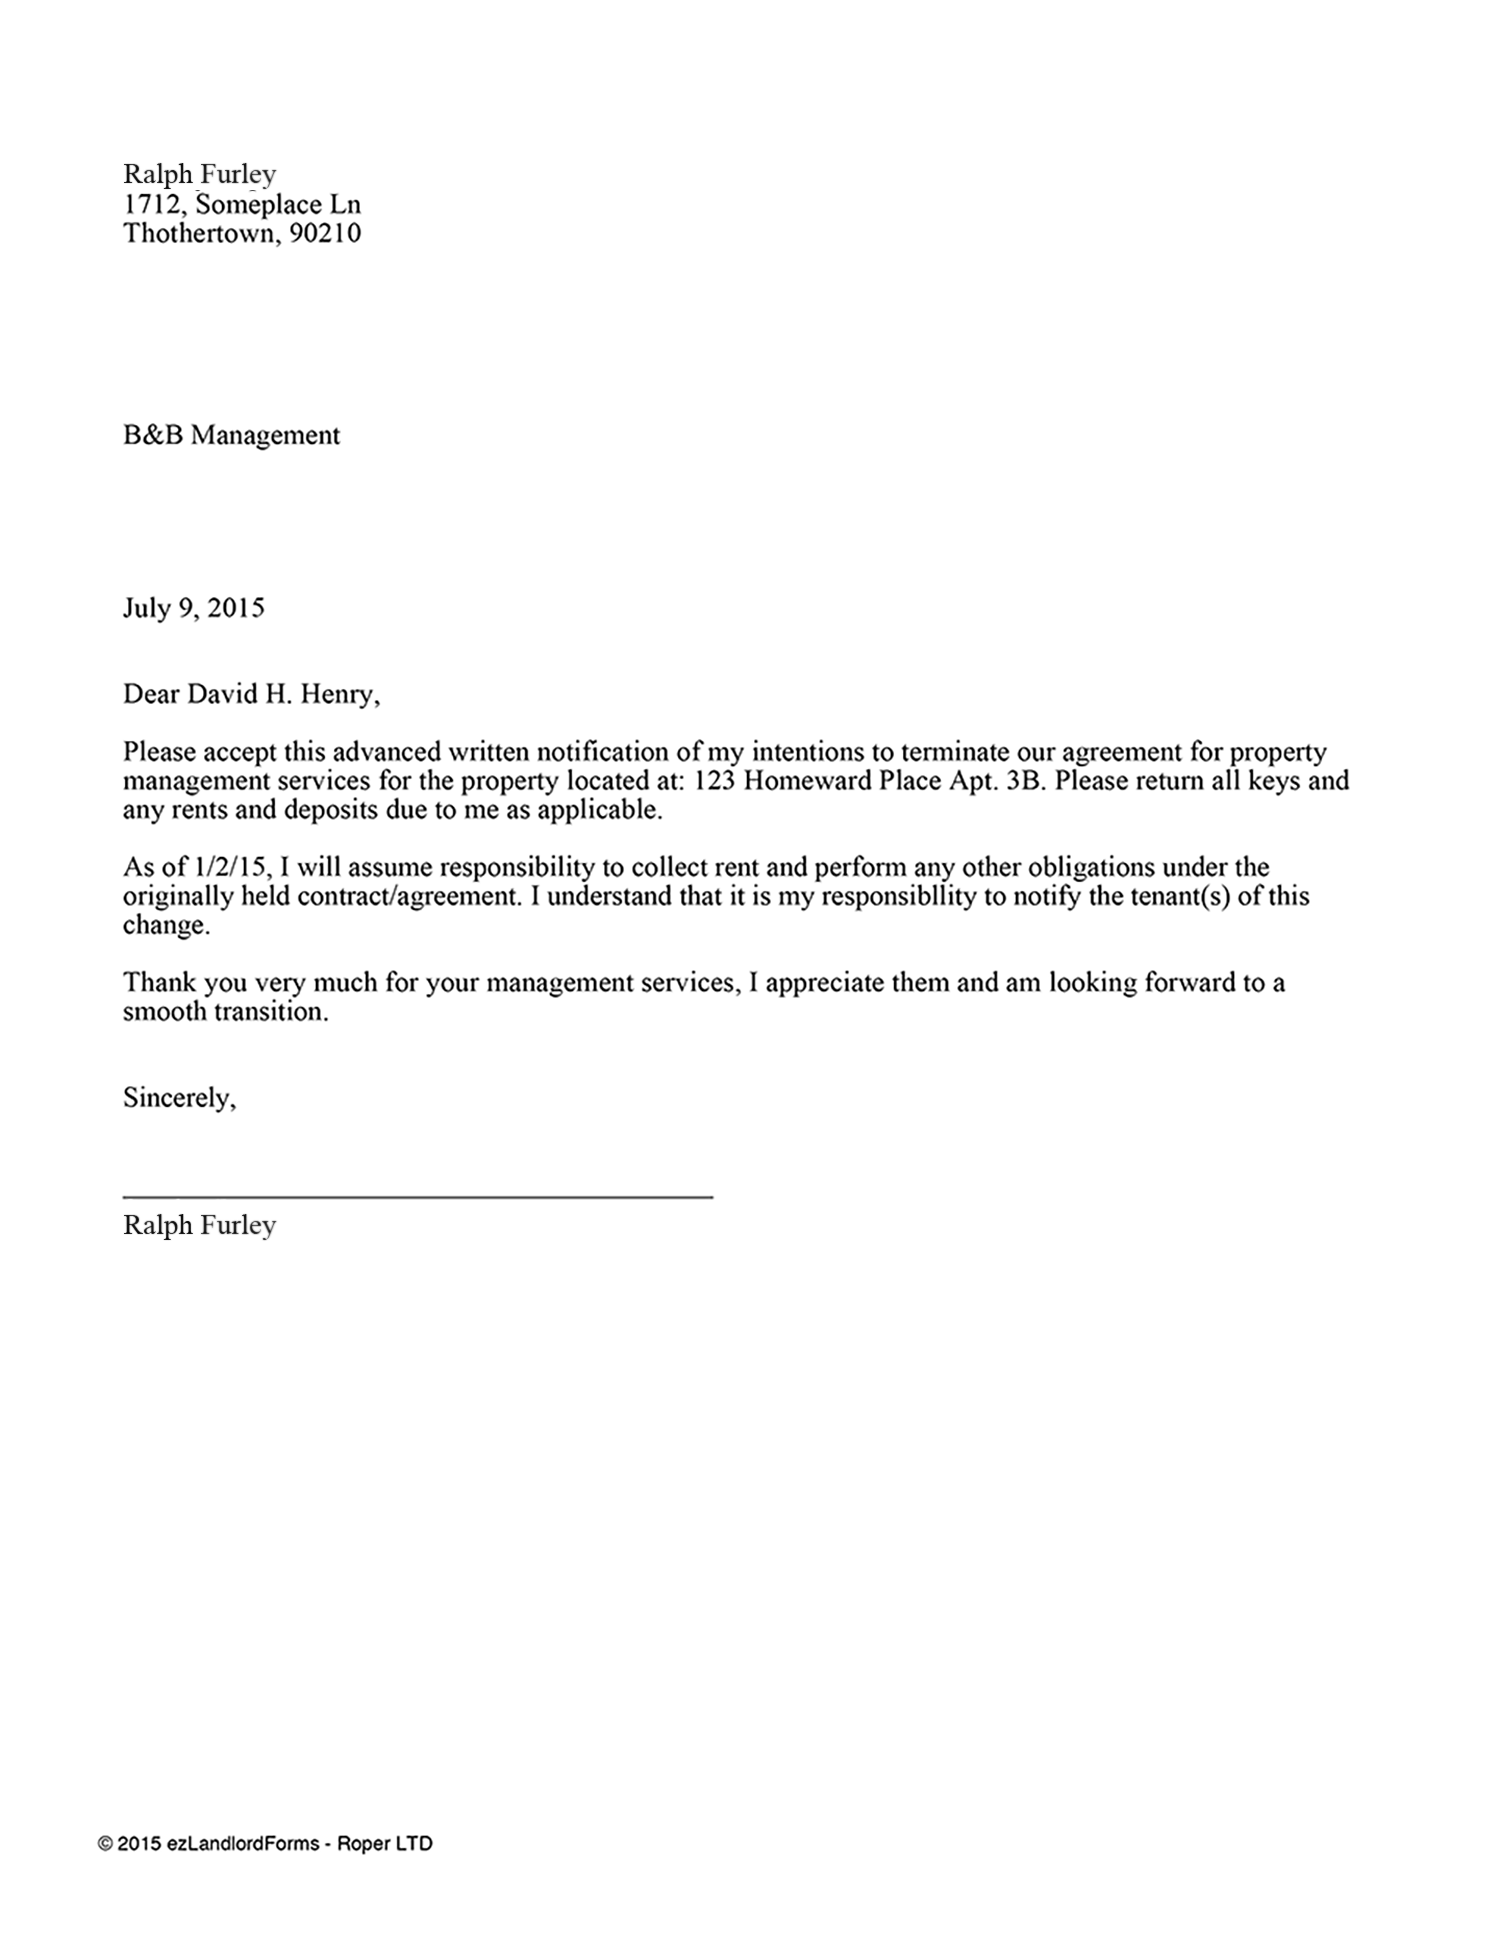 Sample Letter Of Cancellation Of Service Agreement from www.ezlandlordforms.com